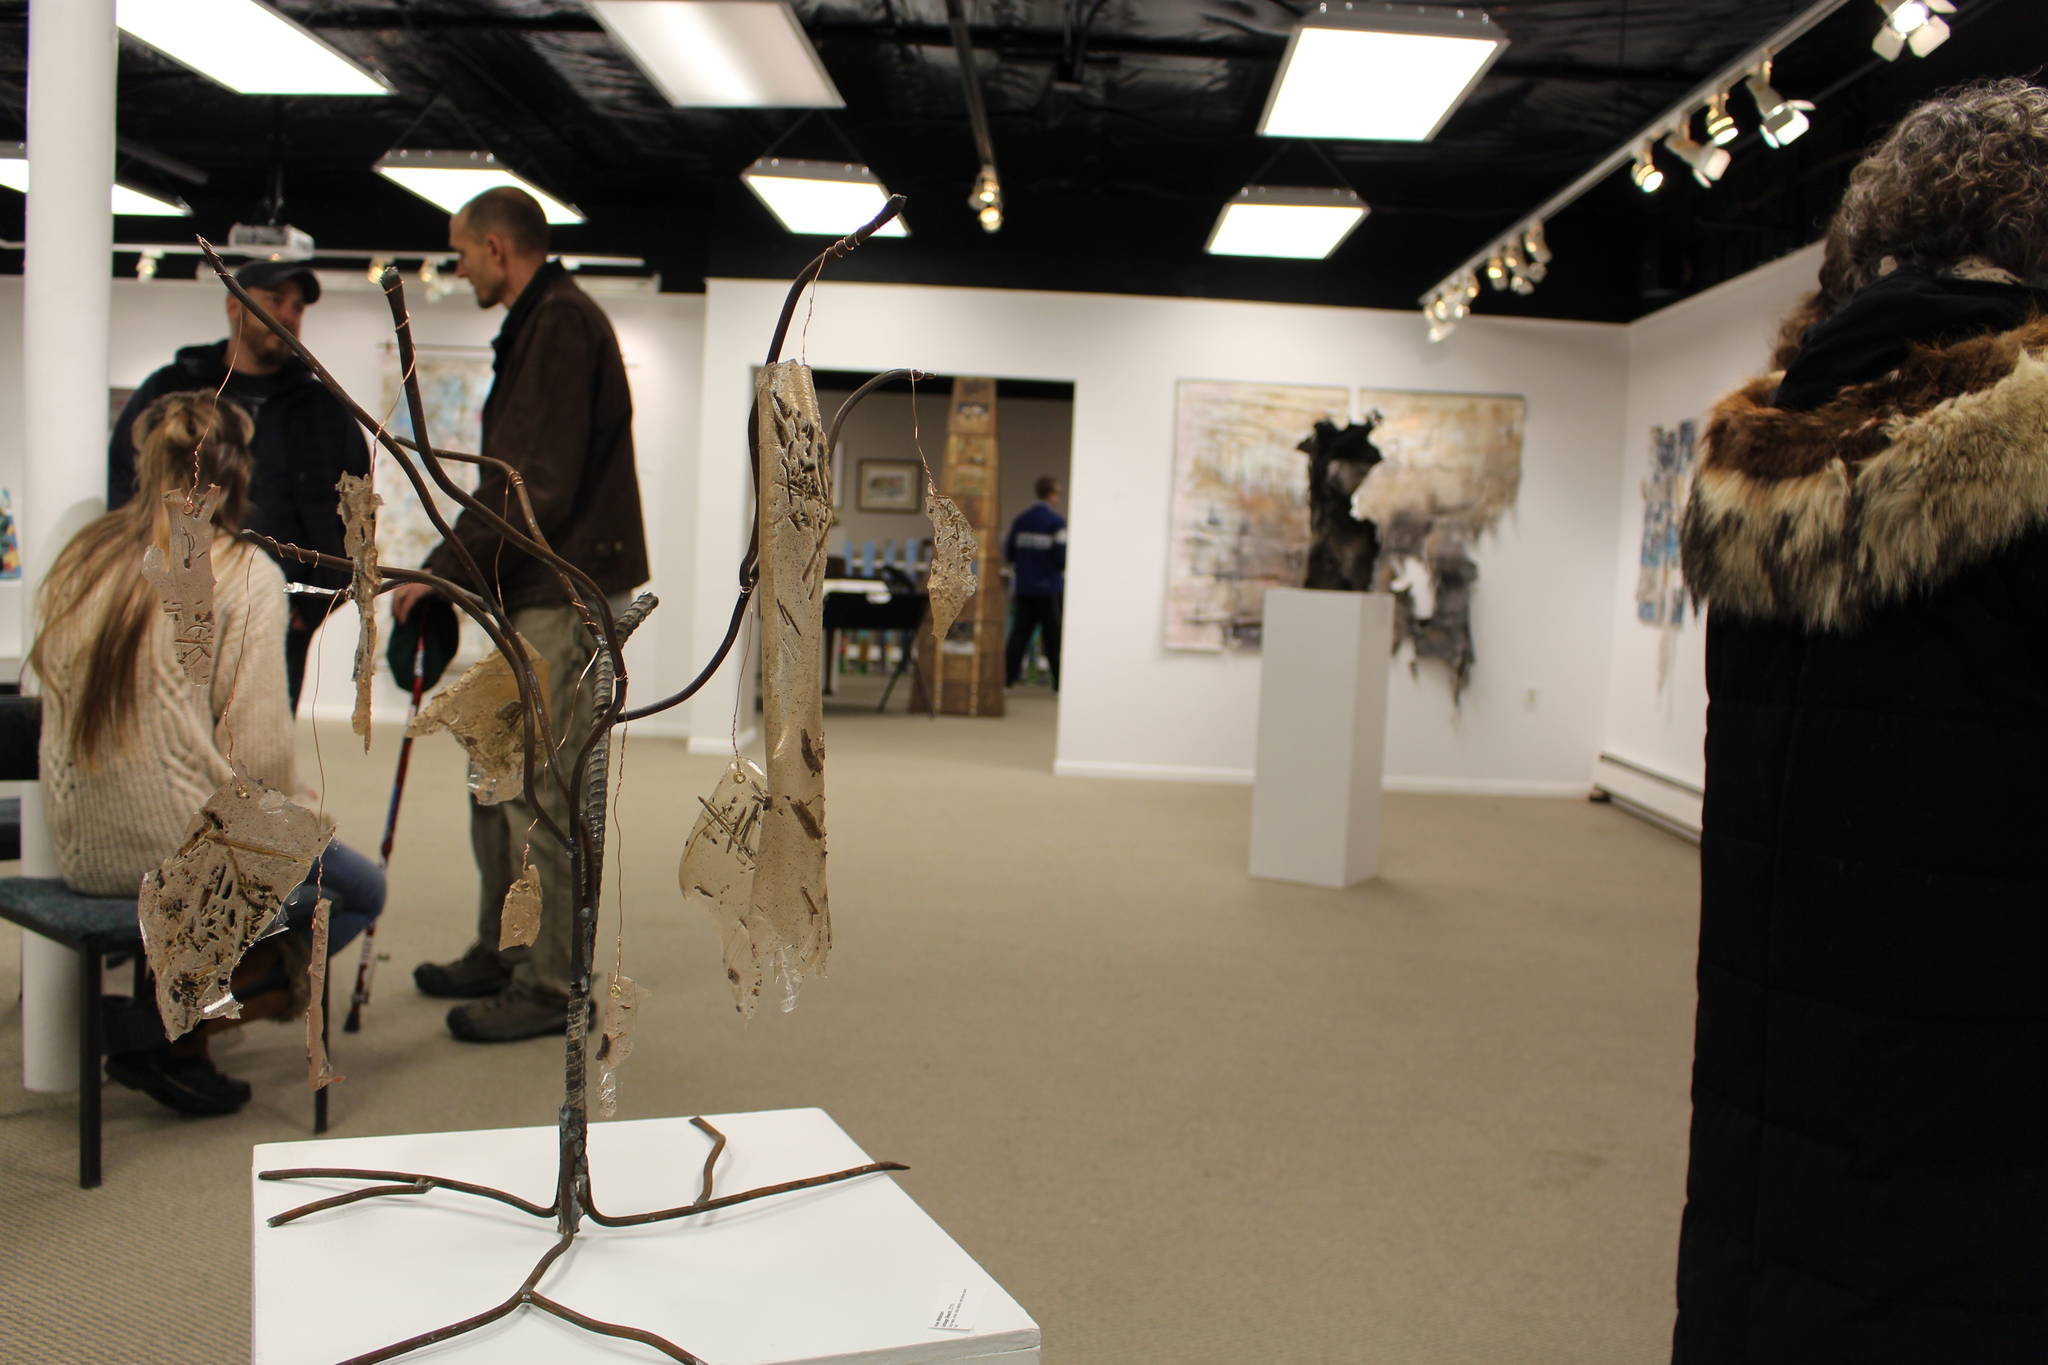 The work of Stephanie Cox and Anna Widman is seen here on display at the Kenai Fine Art Center in Kenai, Alaska, on Jan. 2, 2020. (Photo by Brian Mazurek/Peninsula Clarion)